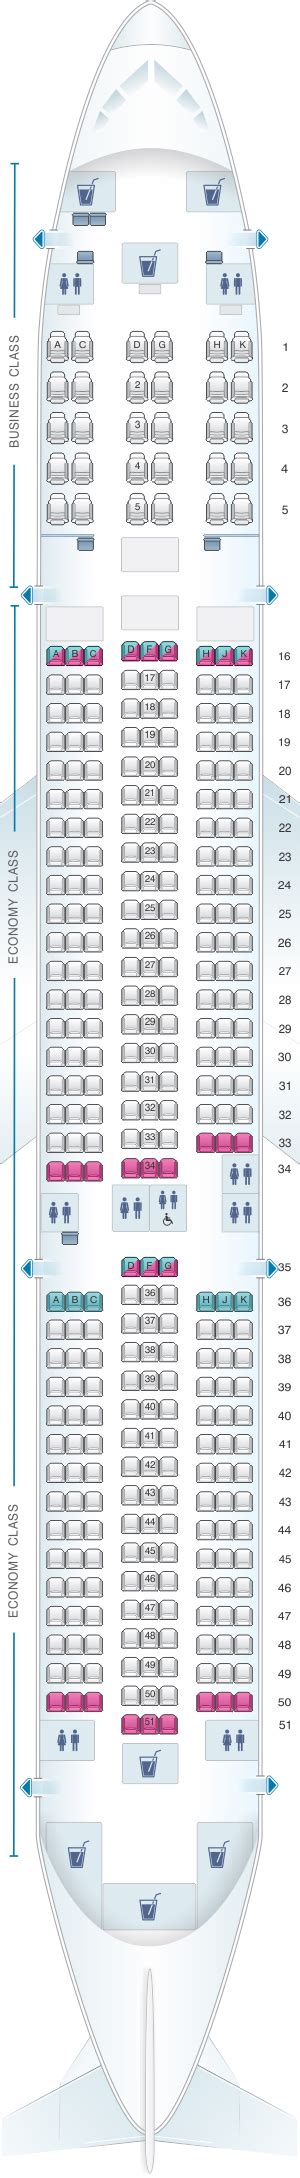 Seat Map Hainan Airlines Airbus A350 900 Config1 Seatmaestro